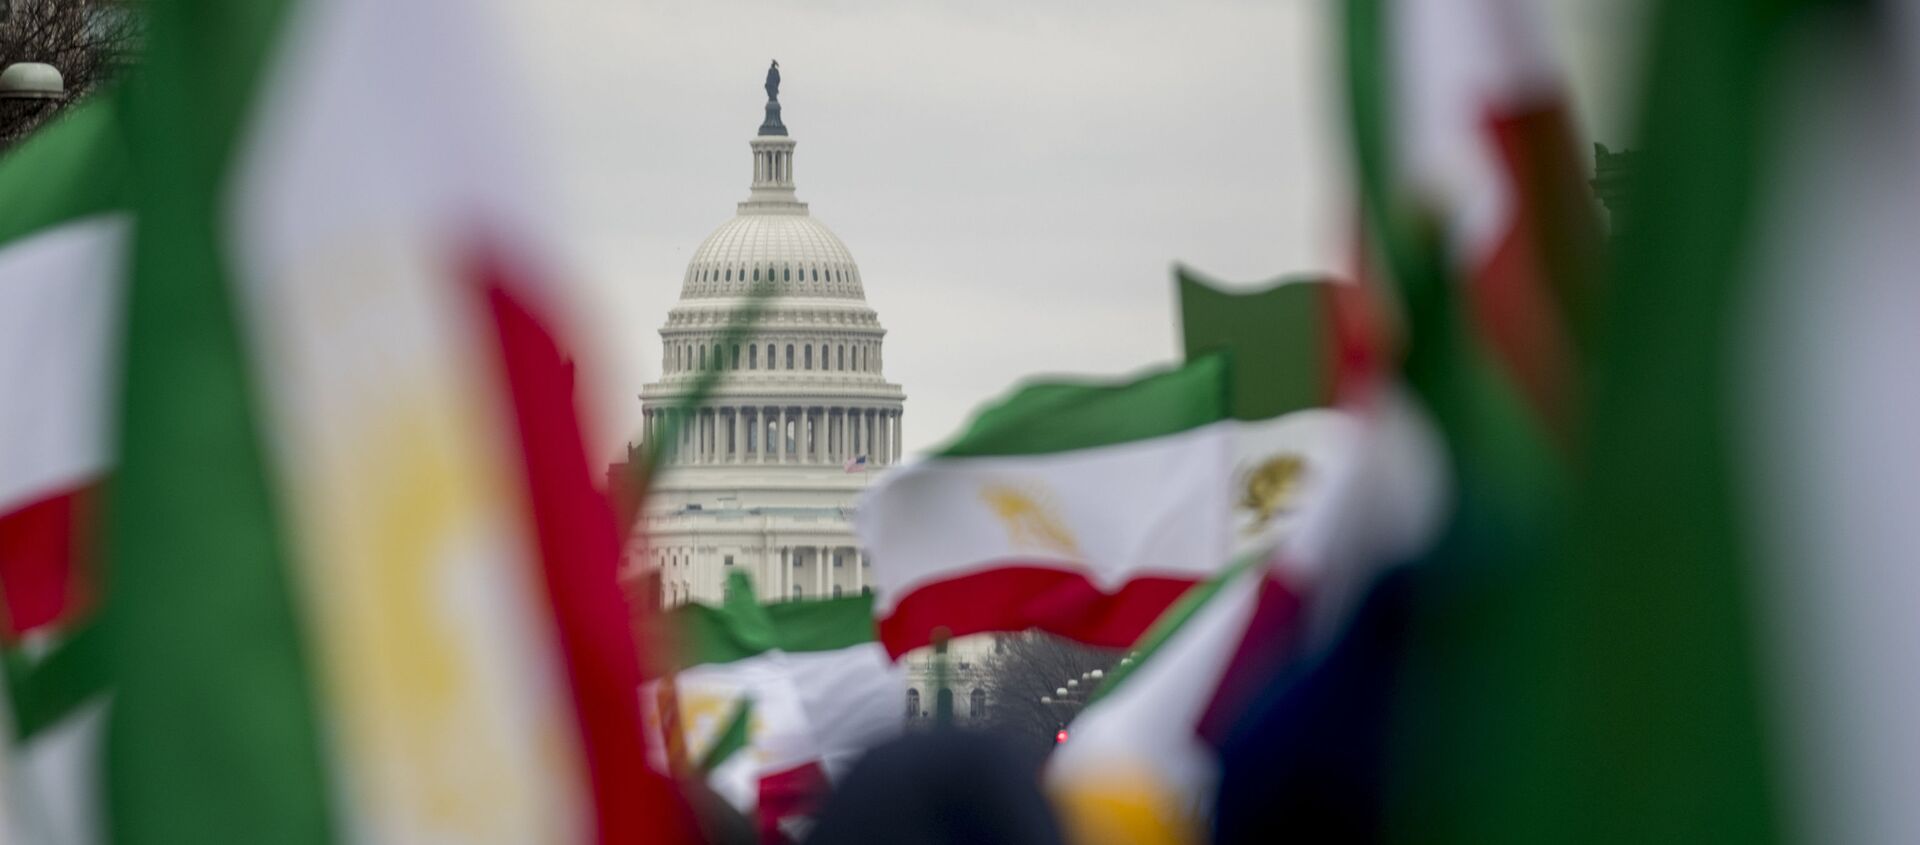 The Dome of the U.S. Capitol building is visible through Iranian flags during an Organization of Iranian-American Communities rally at Freedom Plaza in Washington, Friday, March 8, 2019.  - Sputnik International, 1920, 06.04.2021